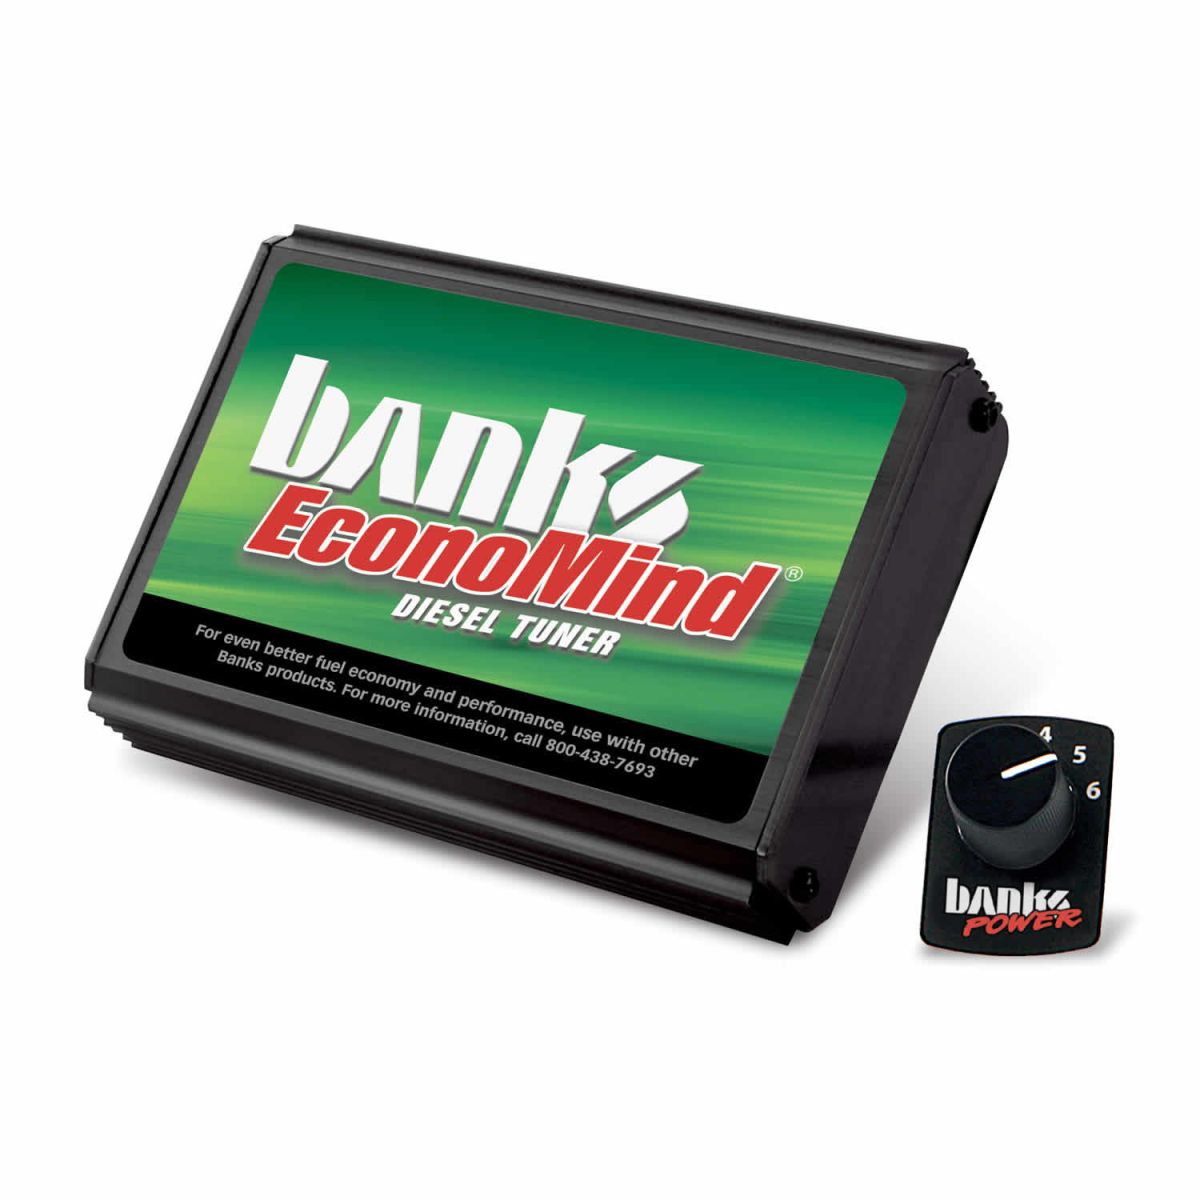 Banks Power - Banks Power EconoMind Diesel Tuner (PowerPack Calibration) W/Switch 06-07 Chevy 6.6L LLY-LBZ